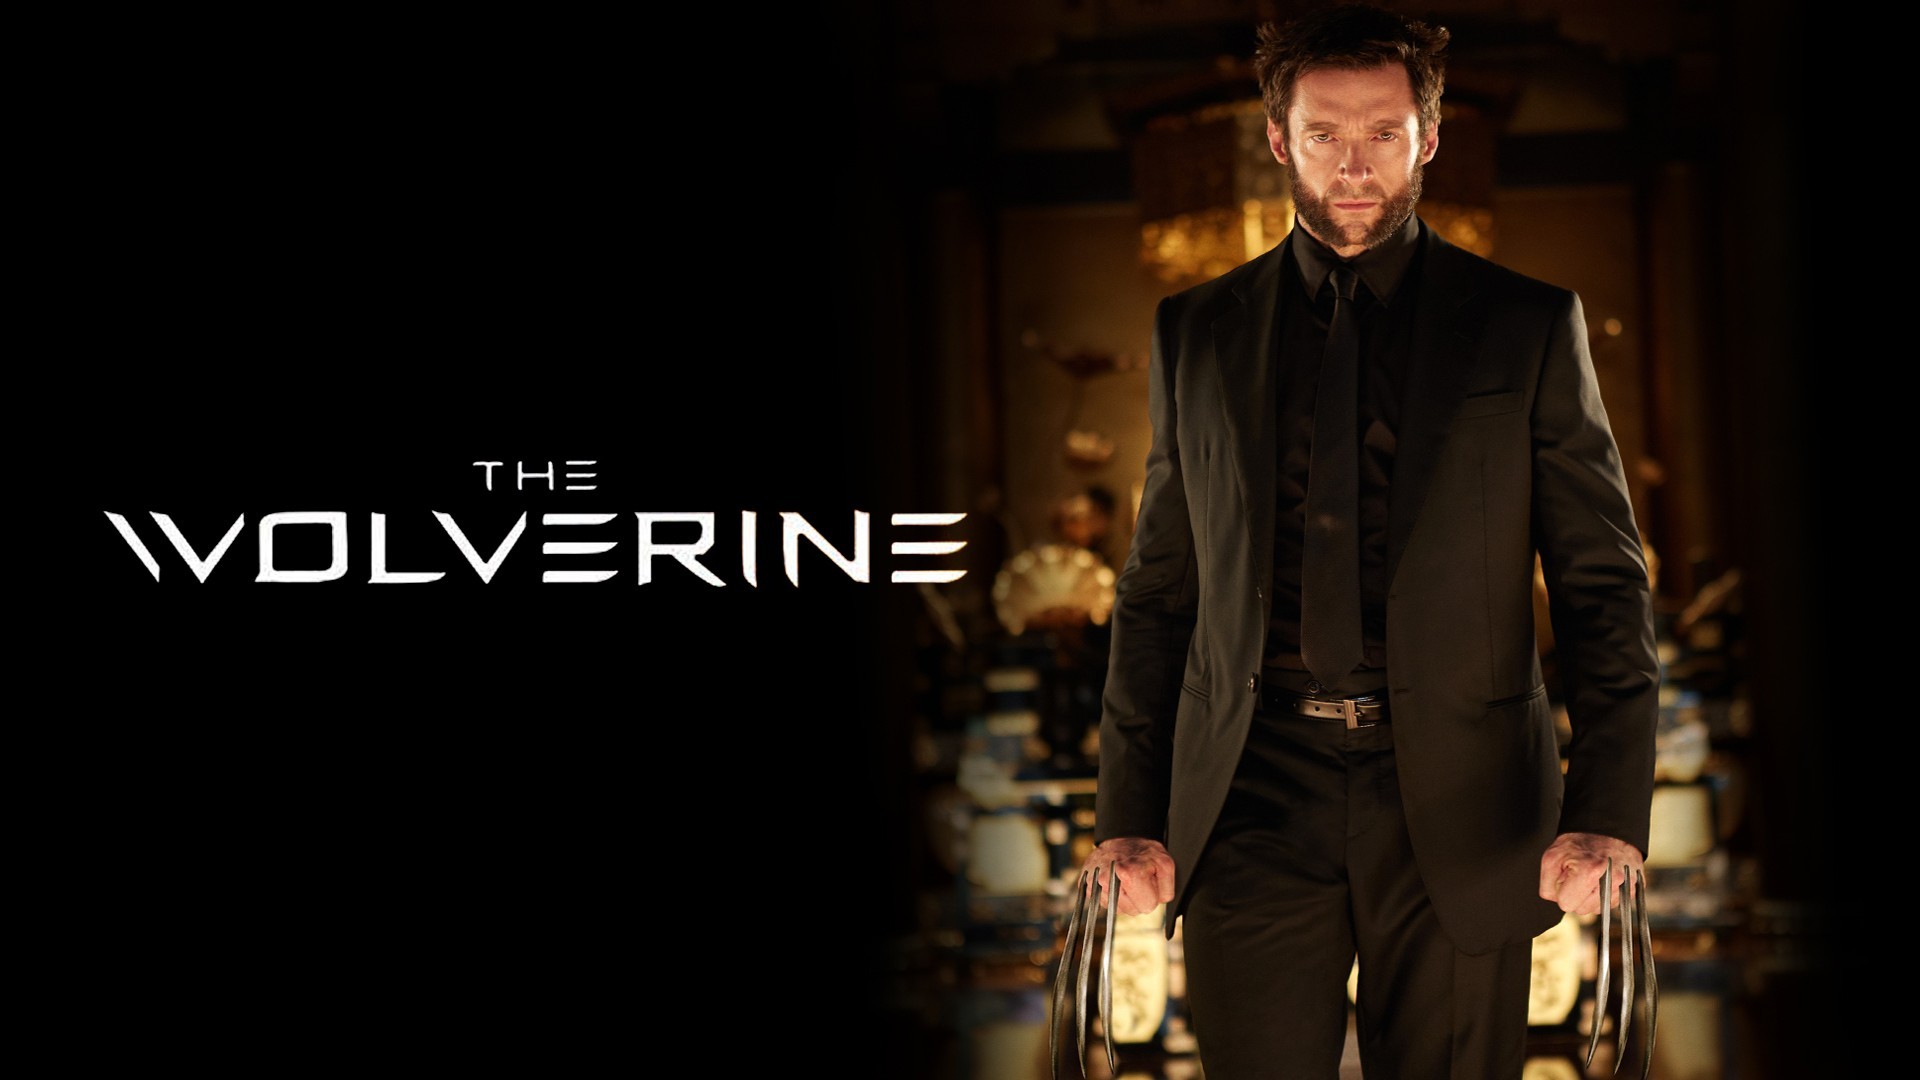 The Wolverine Image HD Wallpaper And